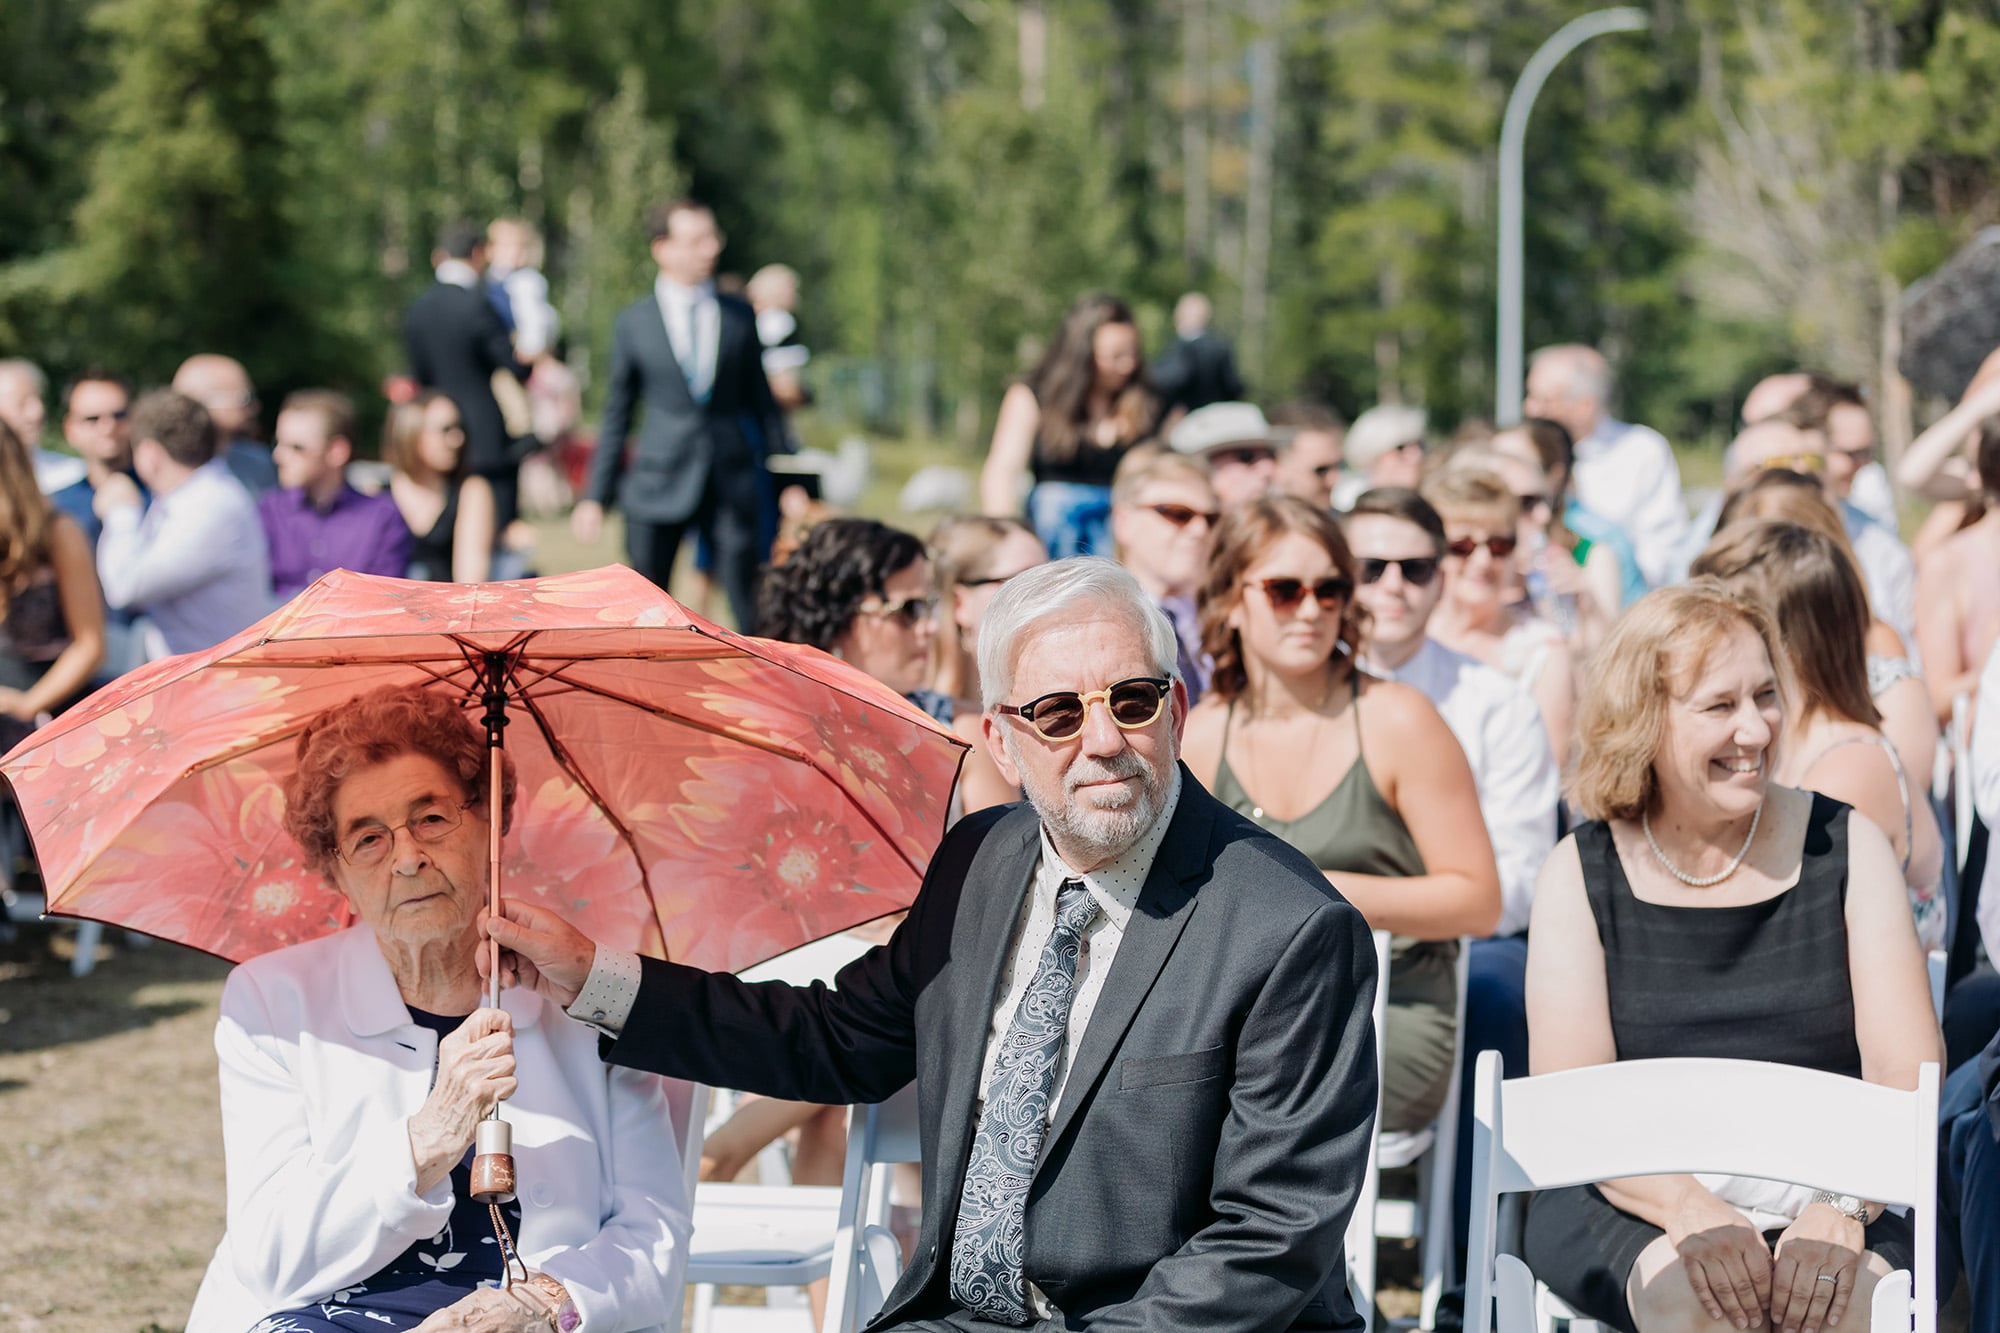 Rundleview Parkette wedding ceremony Canmore